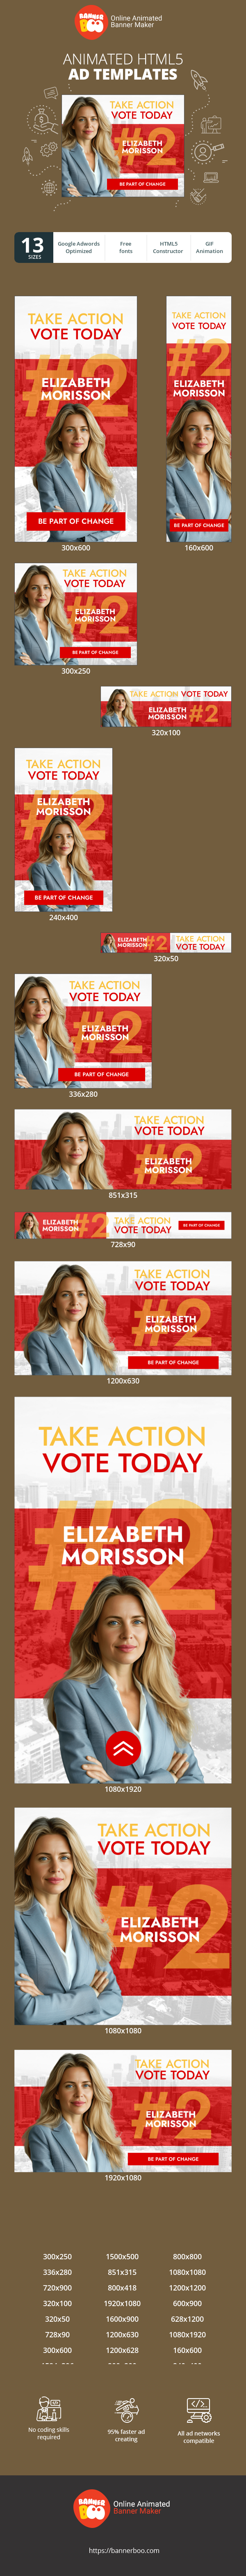 Banner ad template — Take Action Vote Today #2 Elizabeth Morisson — Midterm Election Day